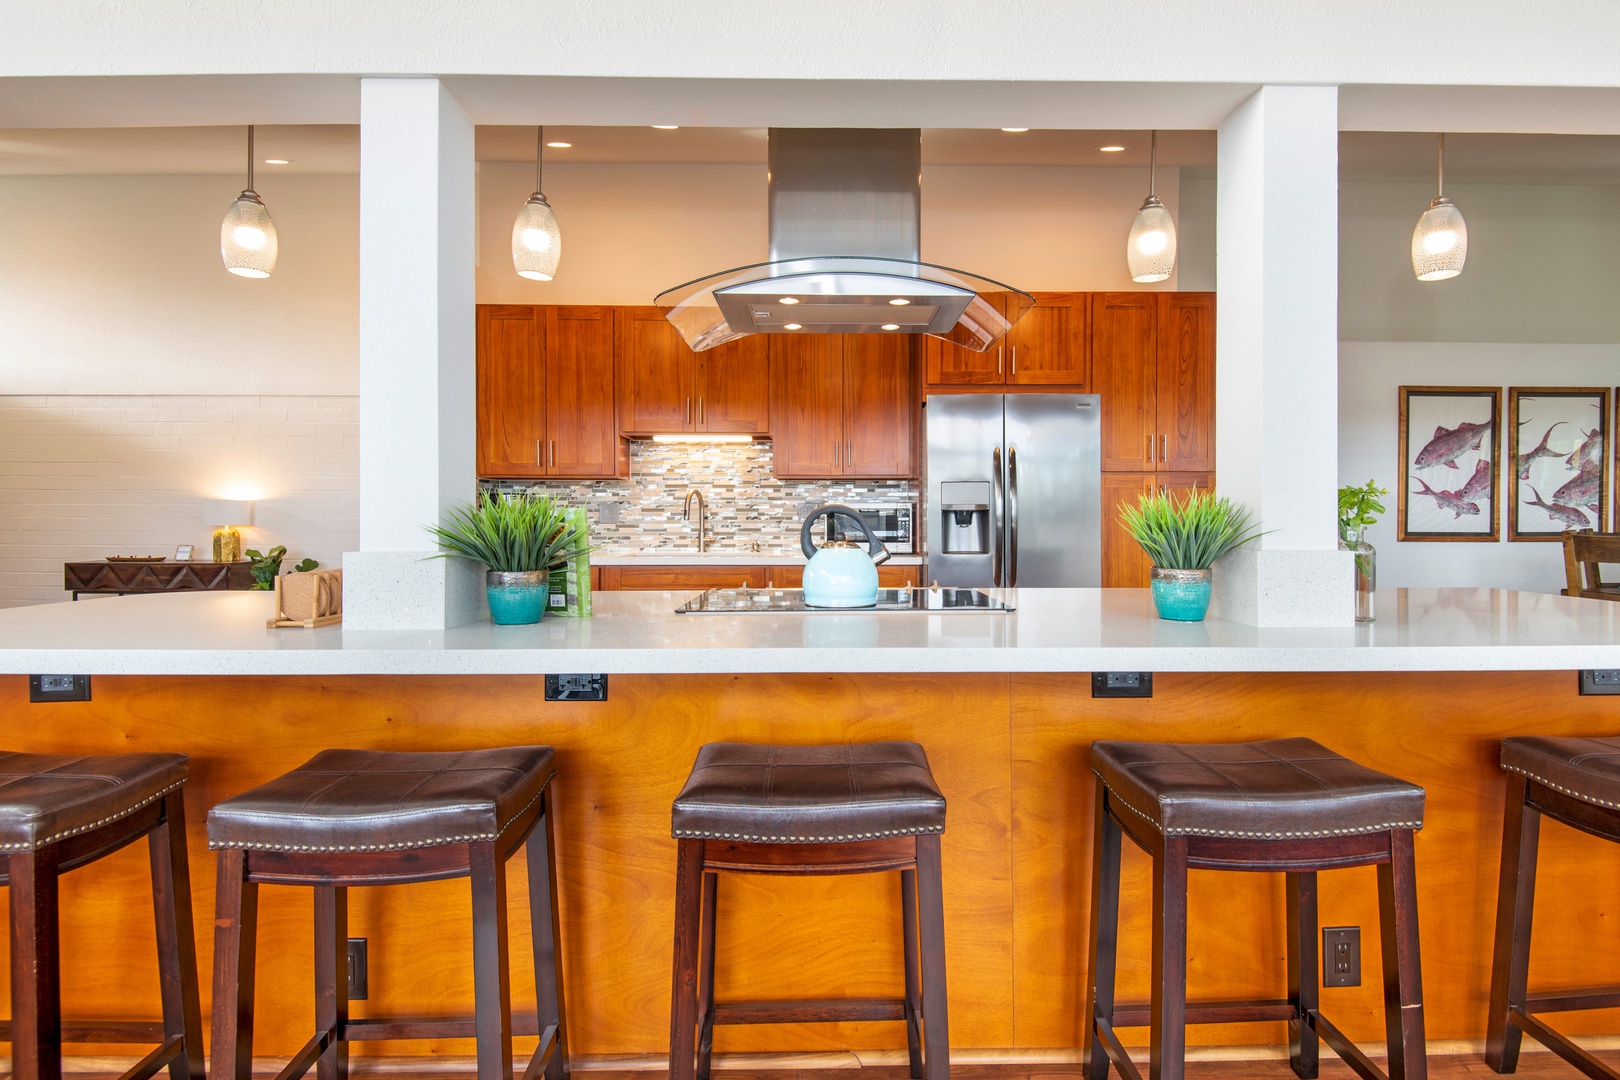 Honolulu Vacation Rentals, Holoholo Hale - Cook up a delicious meal in the kitchen with a breakfast nook, perfect for feasting before you tour around the island.